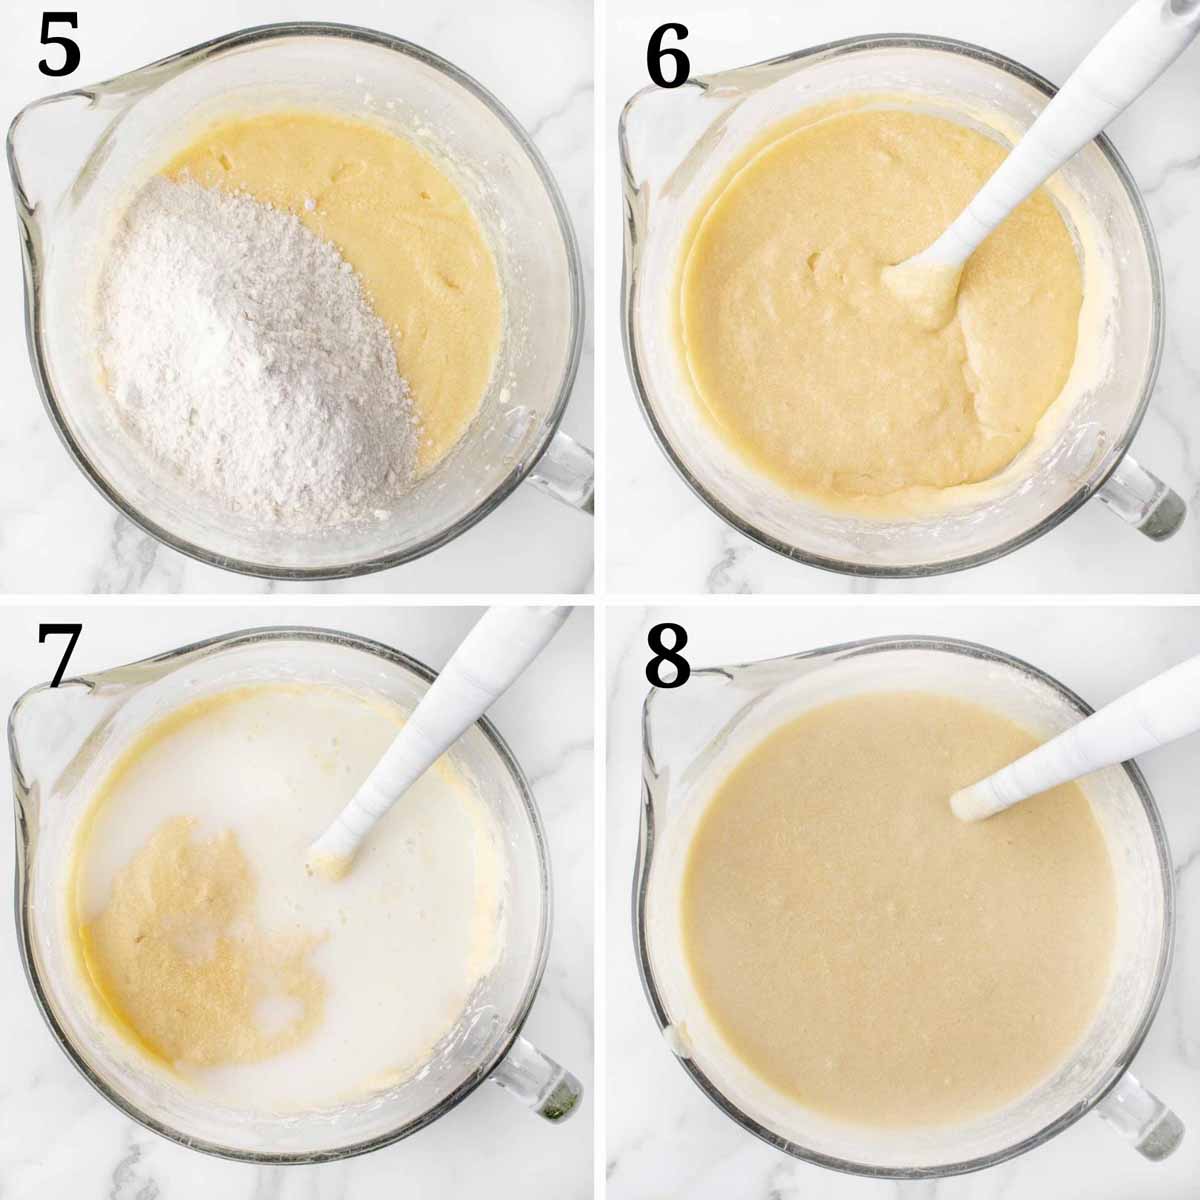 4 images showing how to finish making a yellow cake.